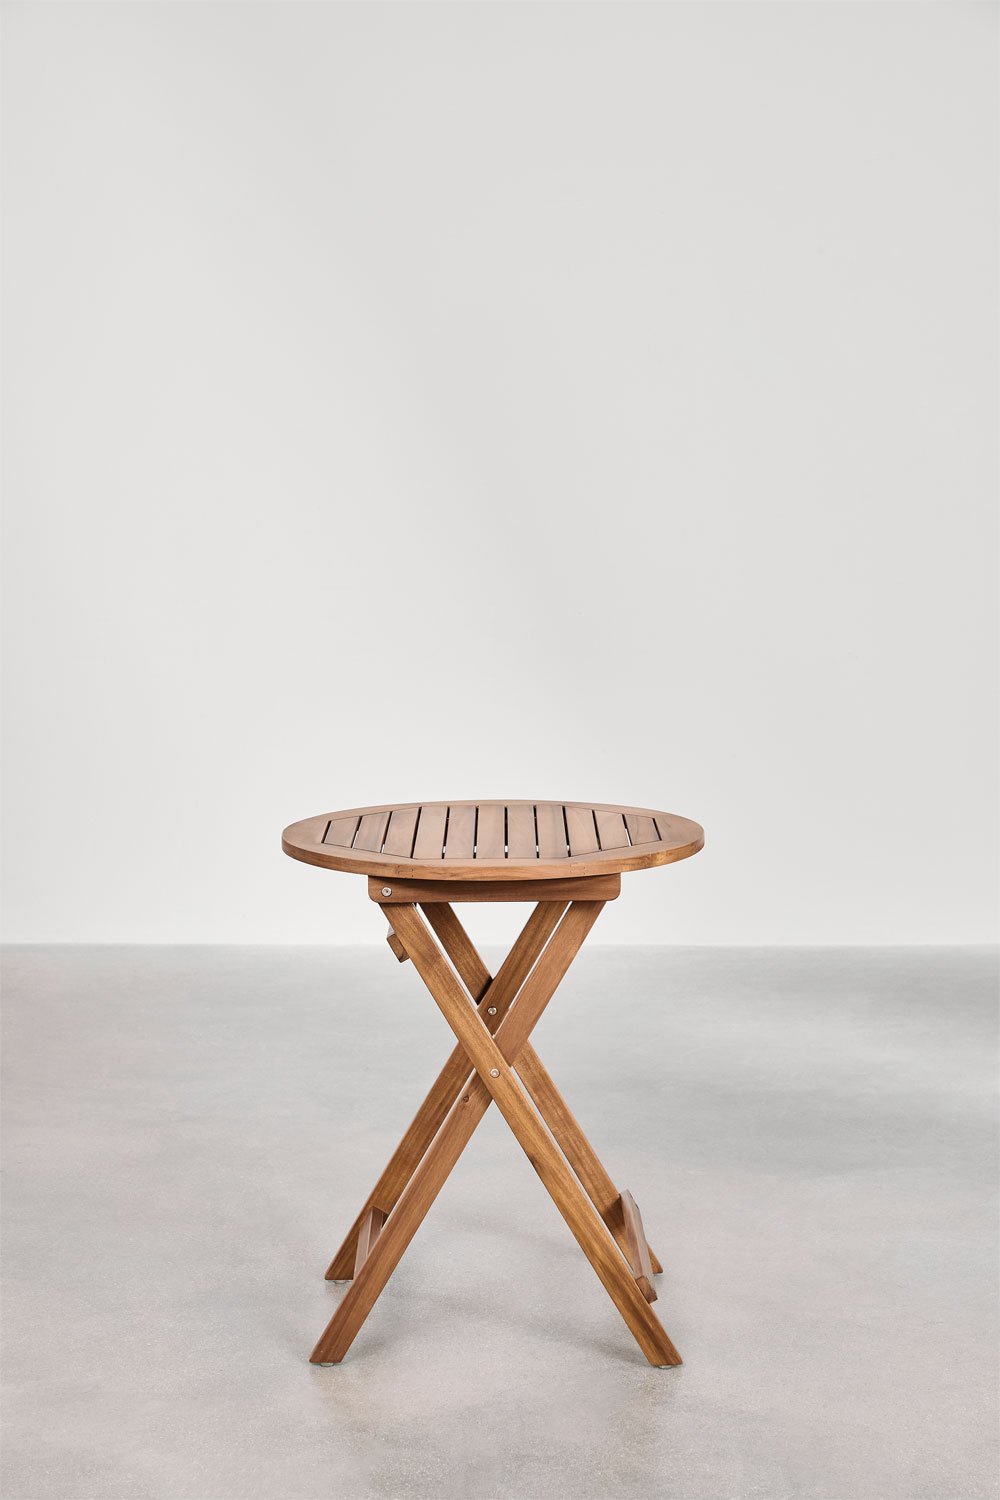 Round Folding Garden Table in Acacia Wood (Ø60 cm) Delawer, gallery image 2